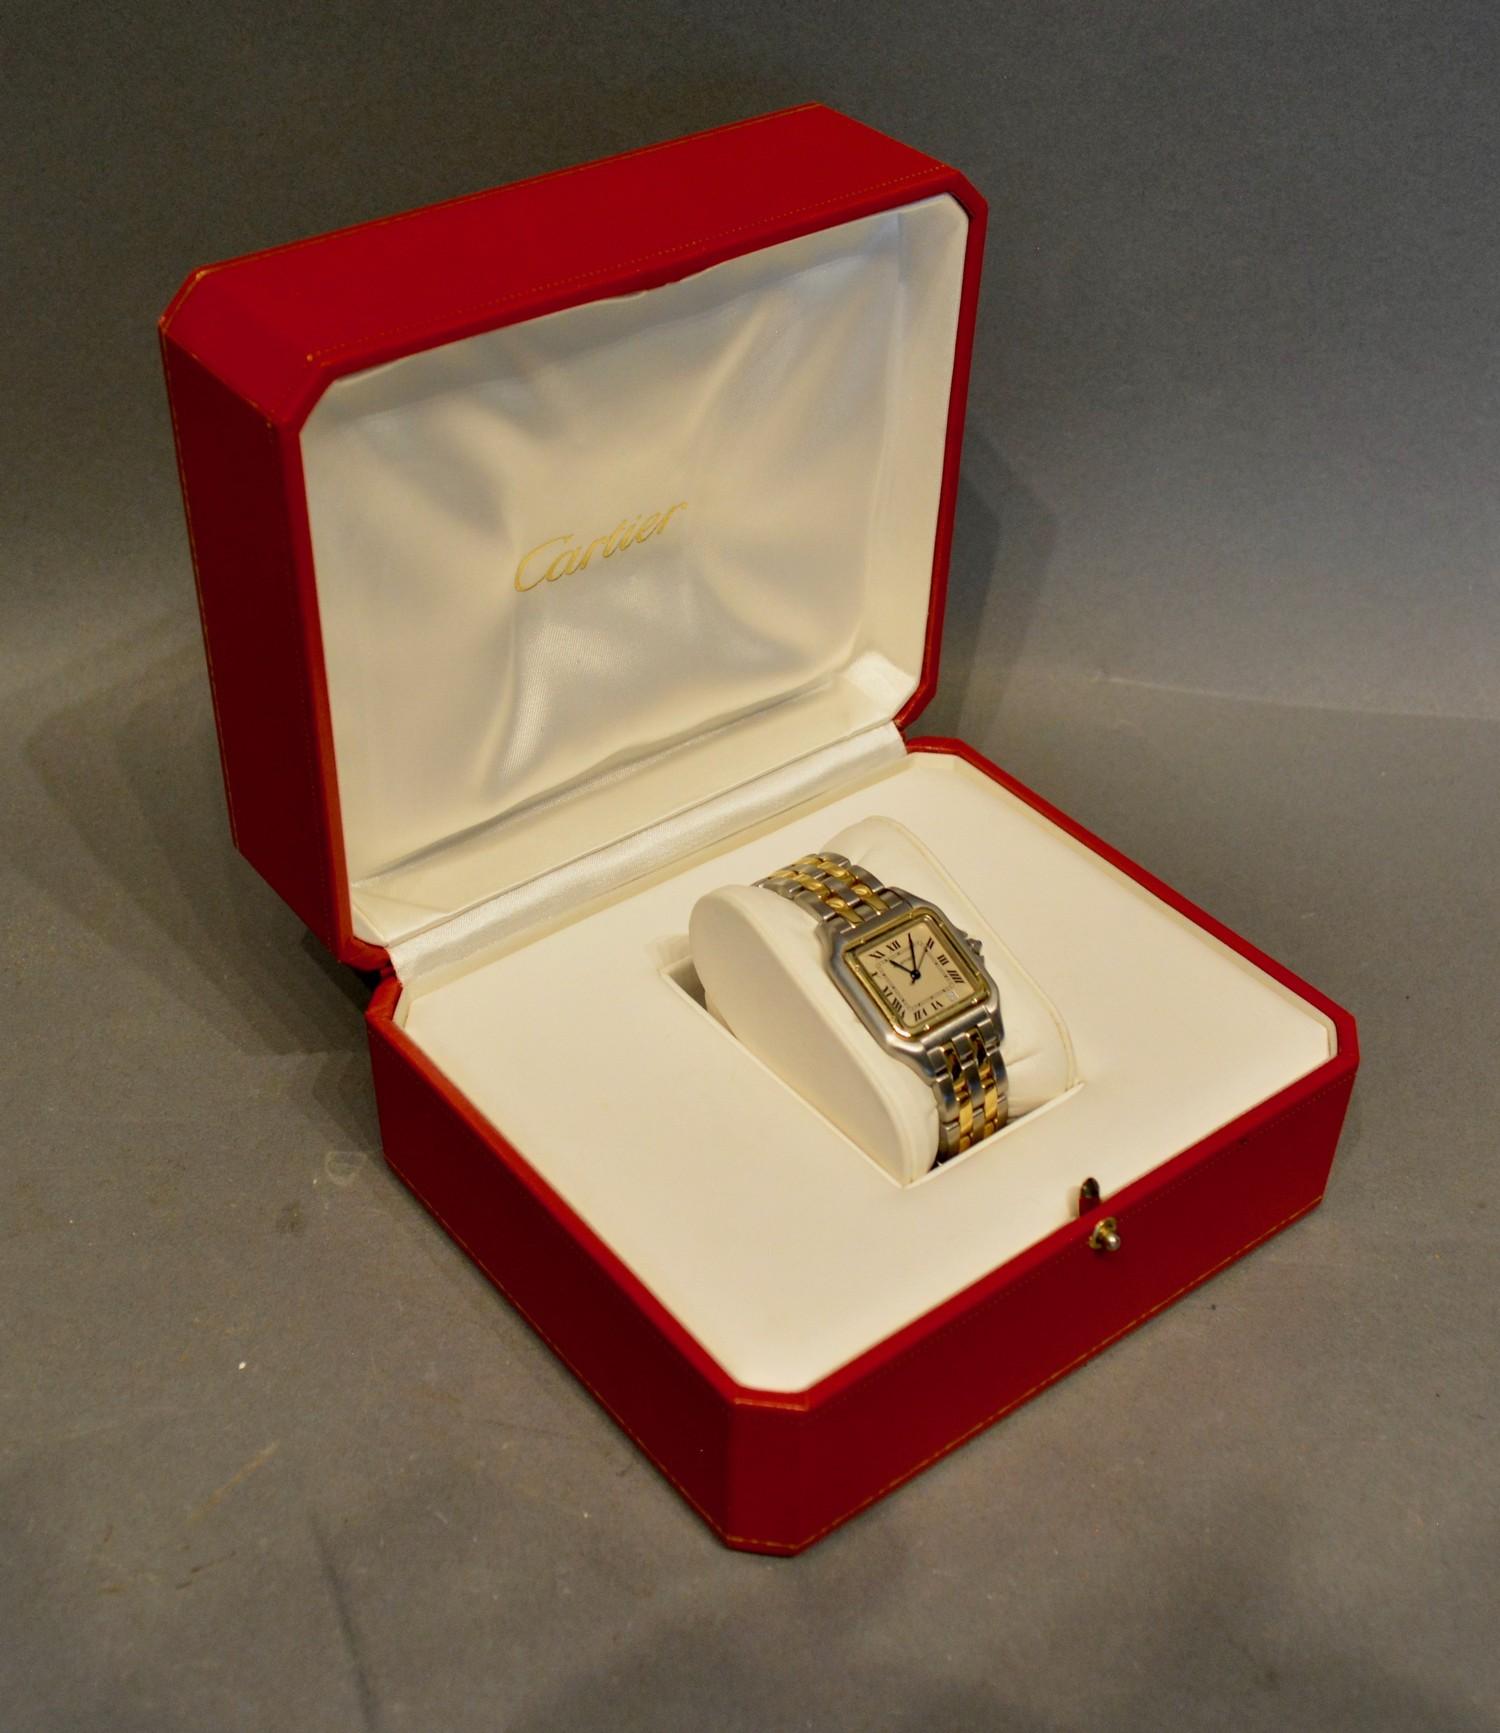 A Cartier Panthere 18 Carat Gold and Stainless Steel Ladies Wristwatch with original box - Image 3 of 3